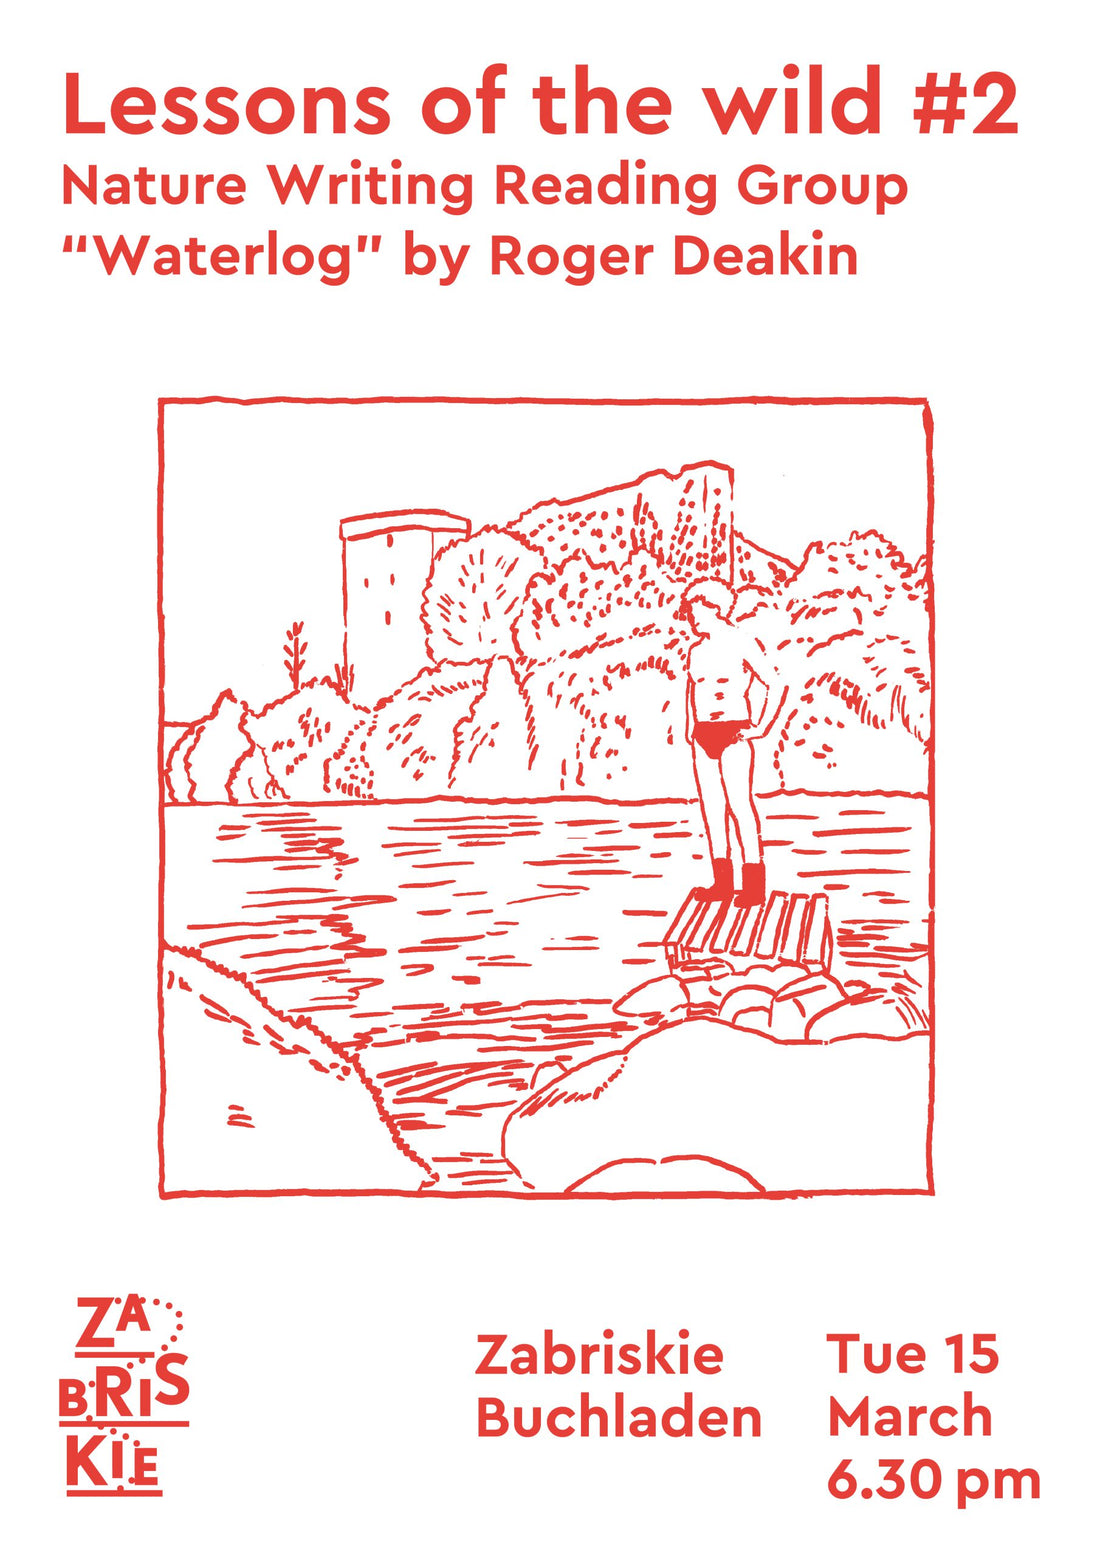 Lessons of the Wild #2. Nature Writing Reading Group. “Waterlog” by Roger Deakin